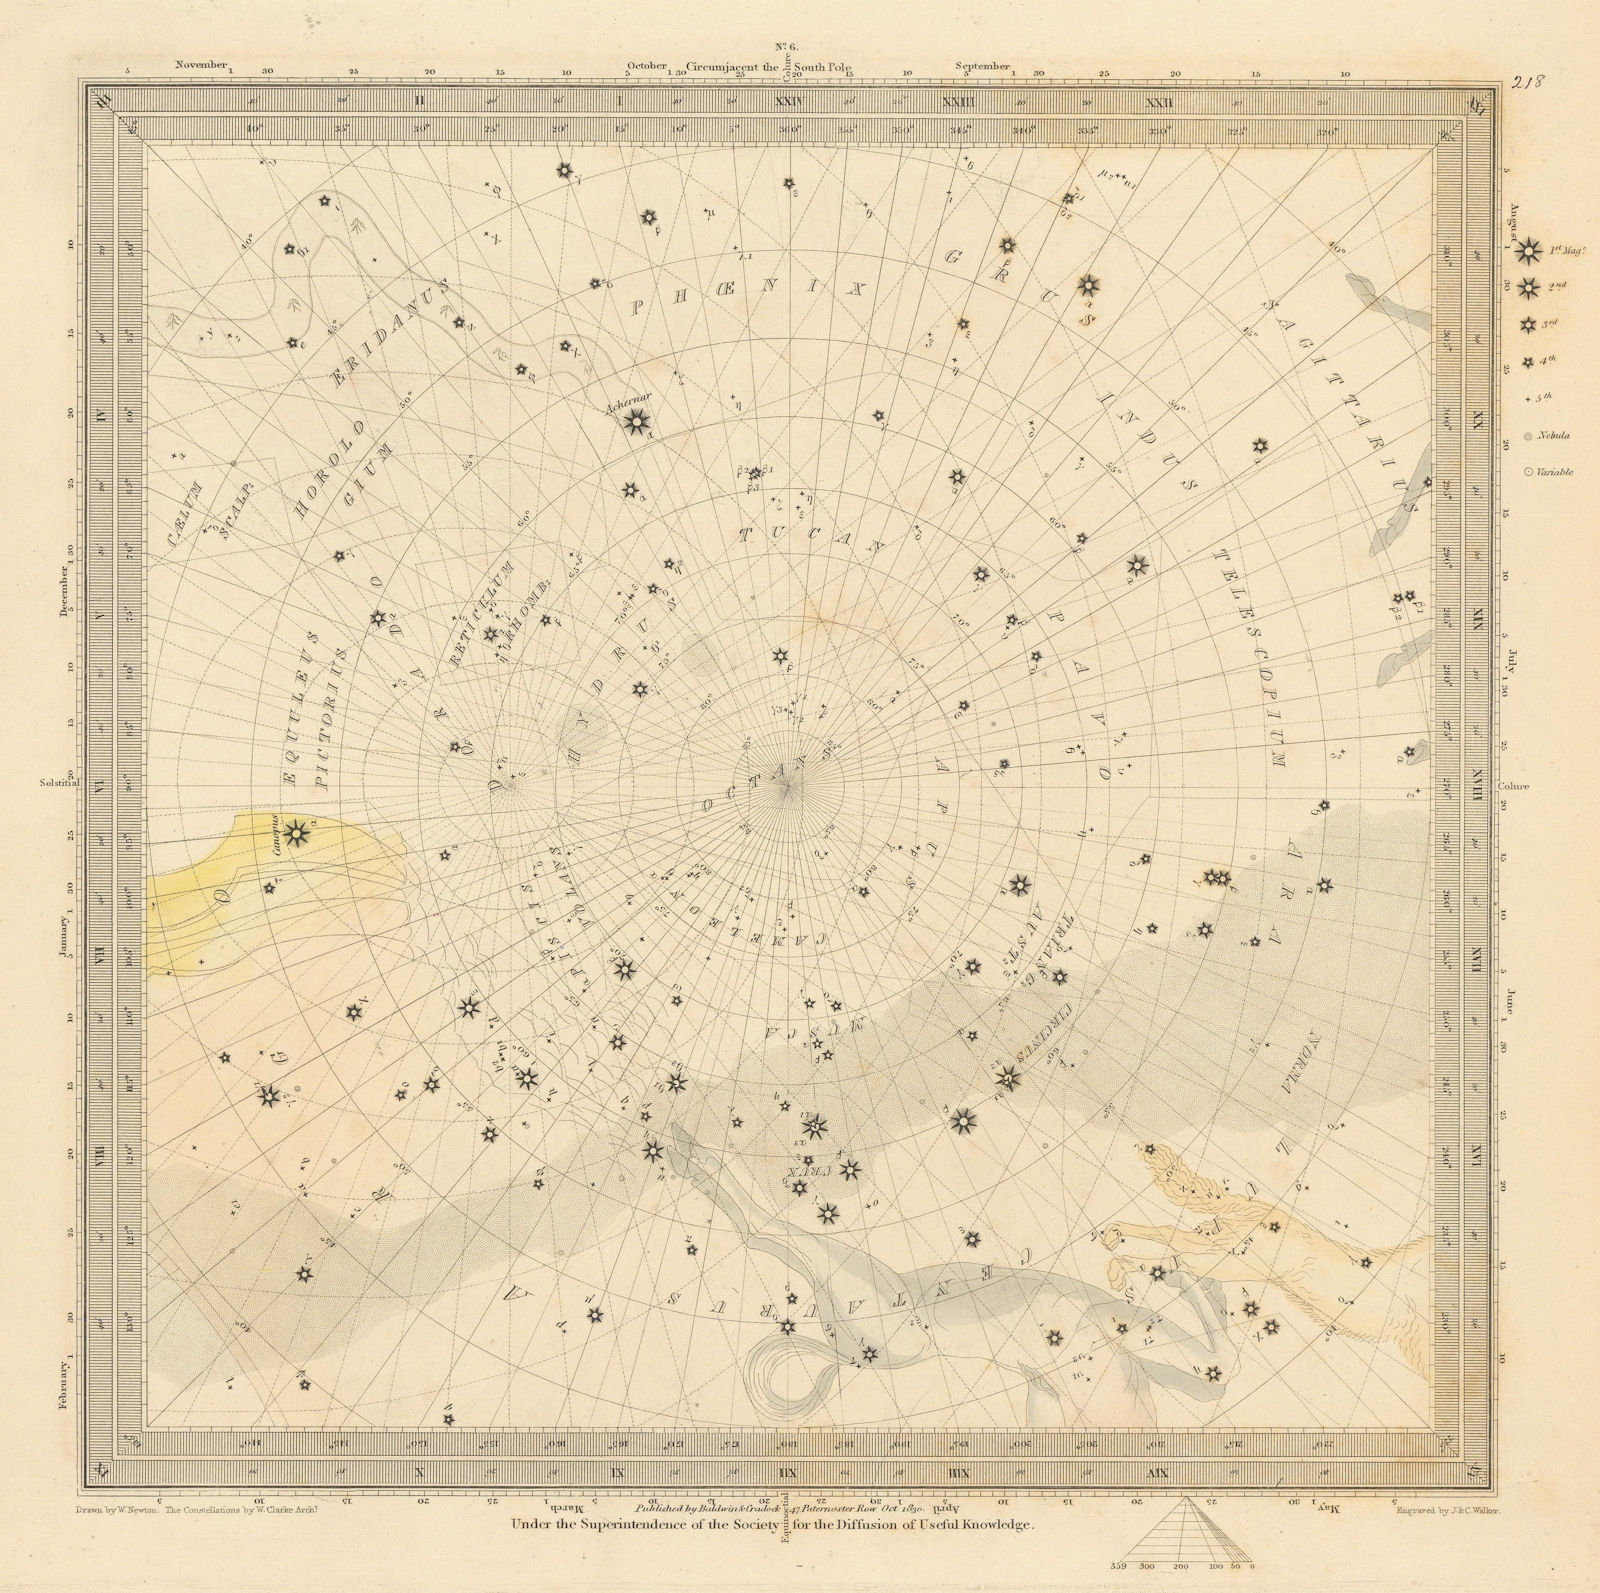 ASTRONOMY CELESTIAL Star map chart 6 South Pole. SDUK 1847 old antique